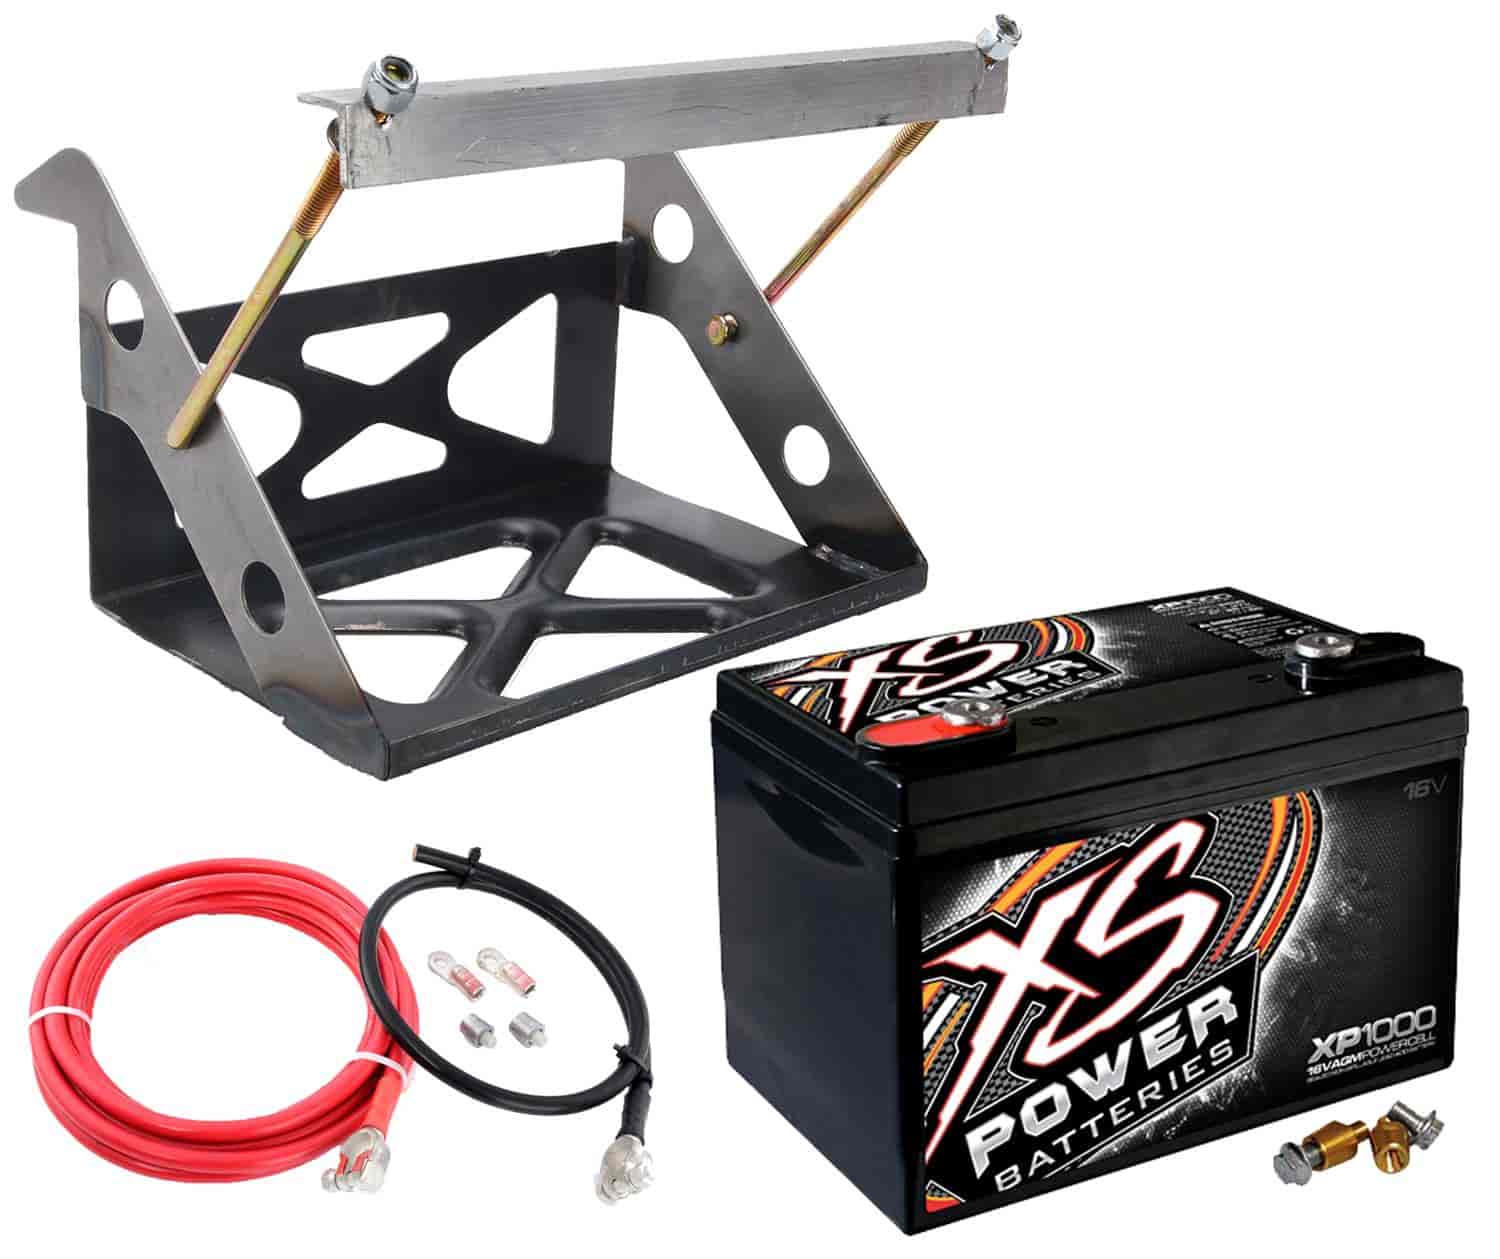 XP-Series AGM Battery and Relocation Kit